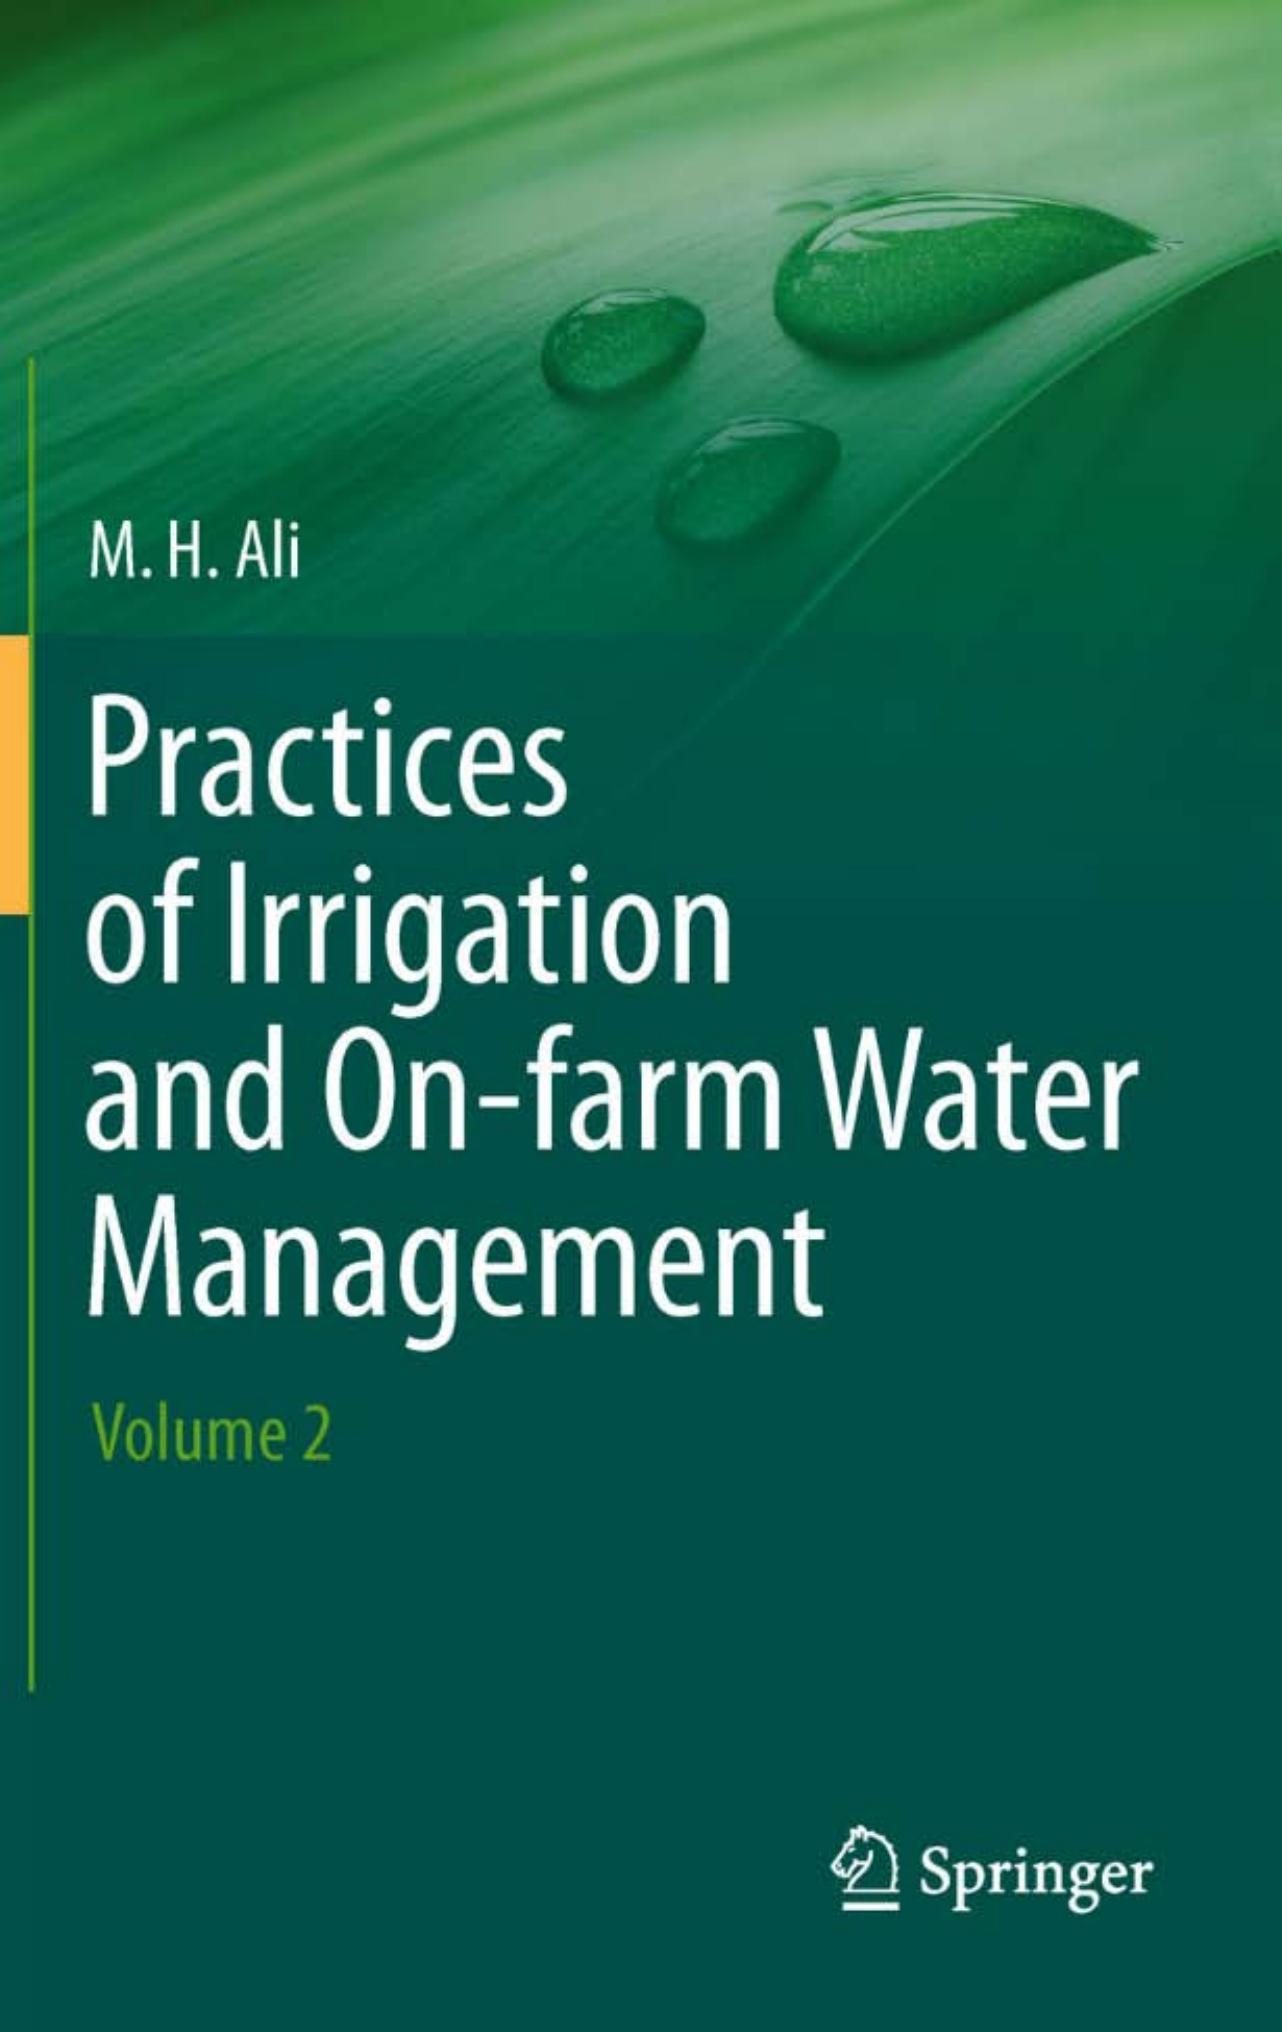 Practices of Irrigation & On-farm Water Management: Volume 2